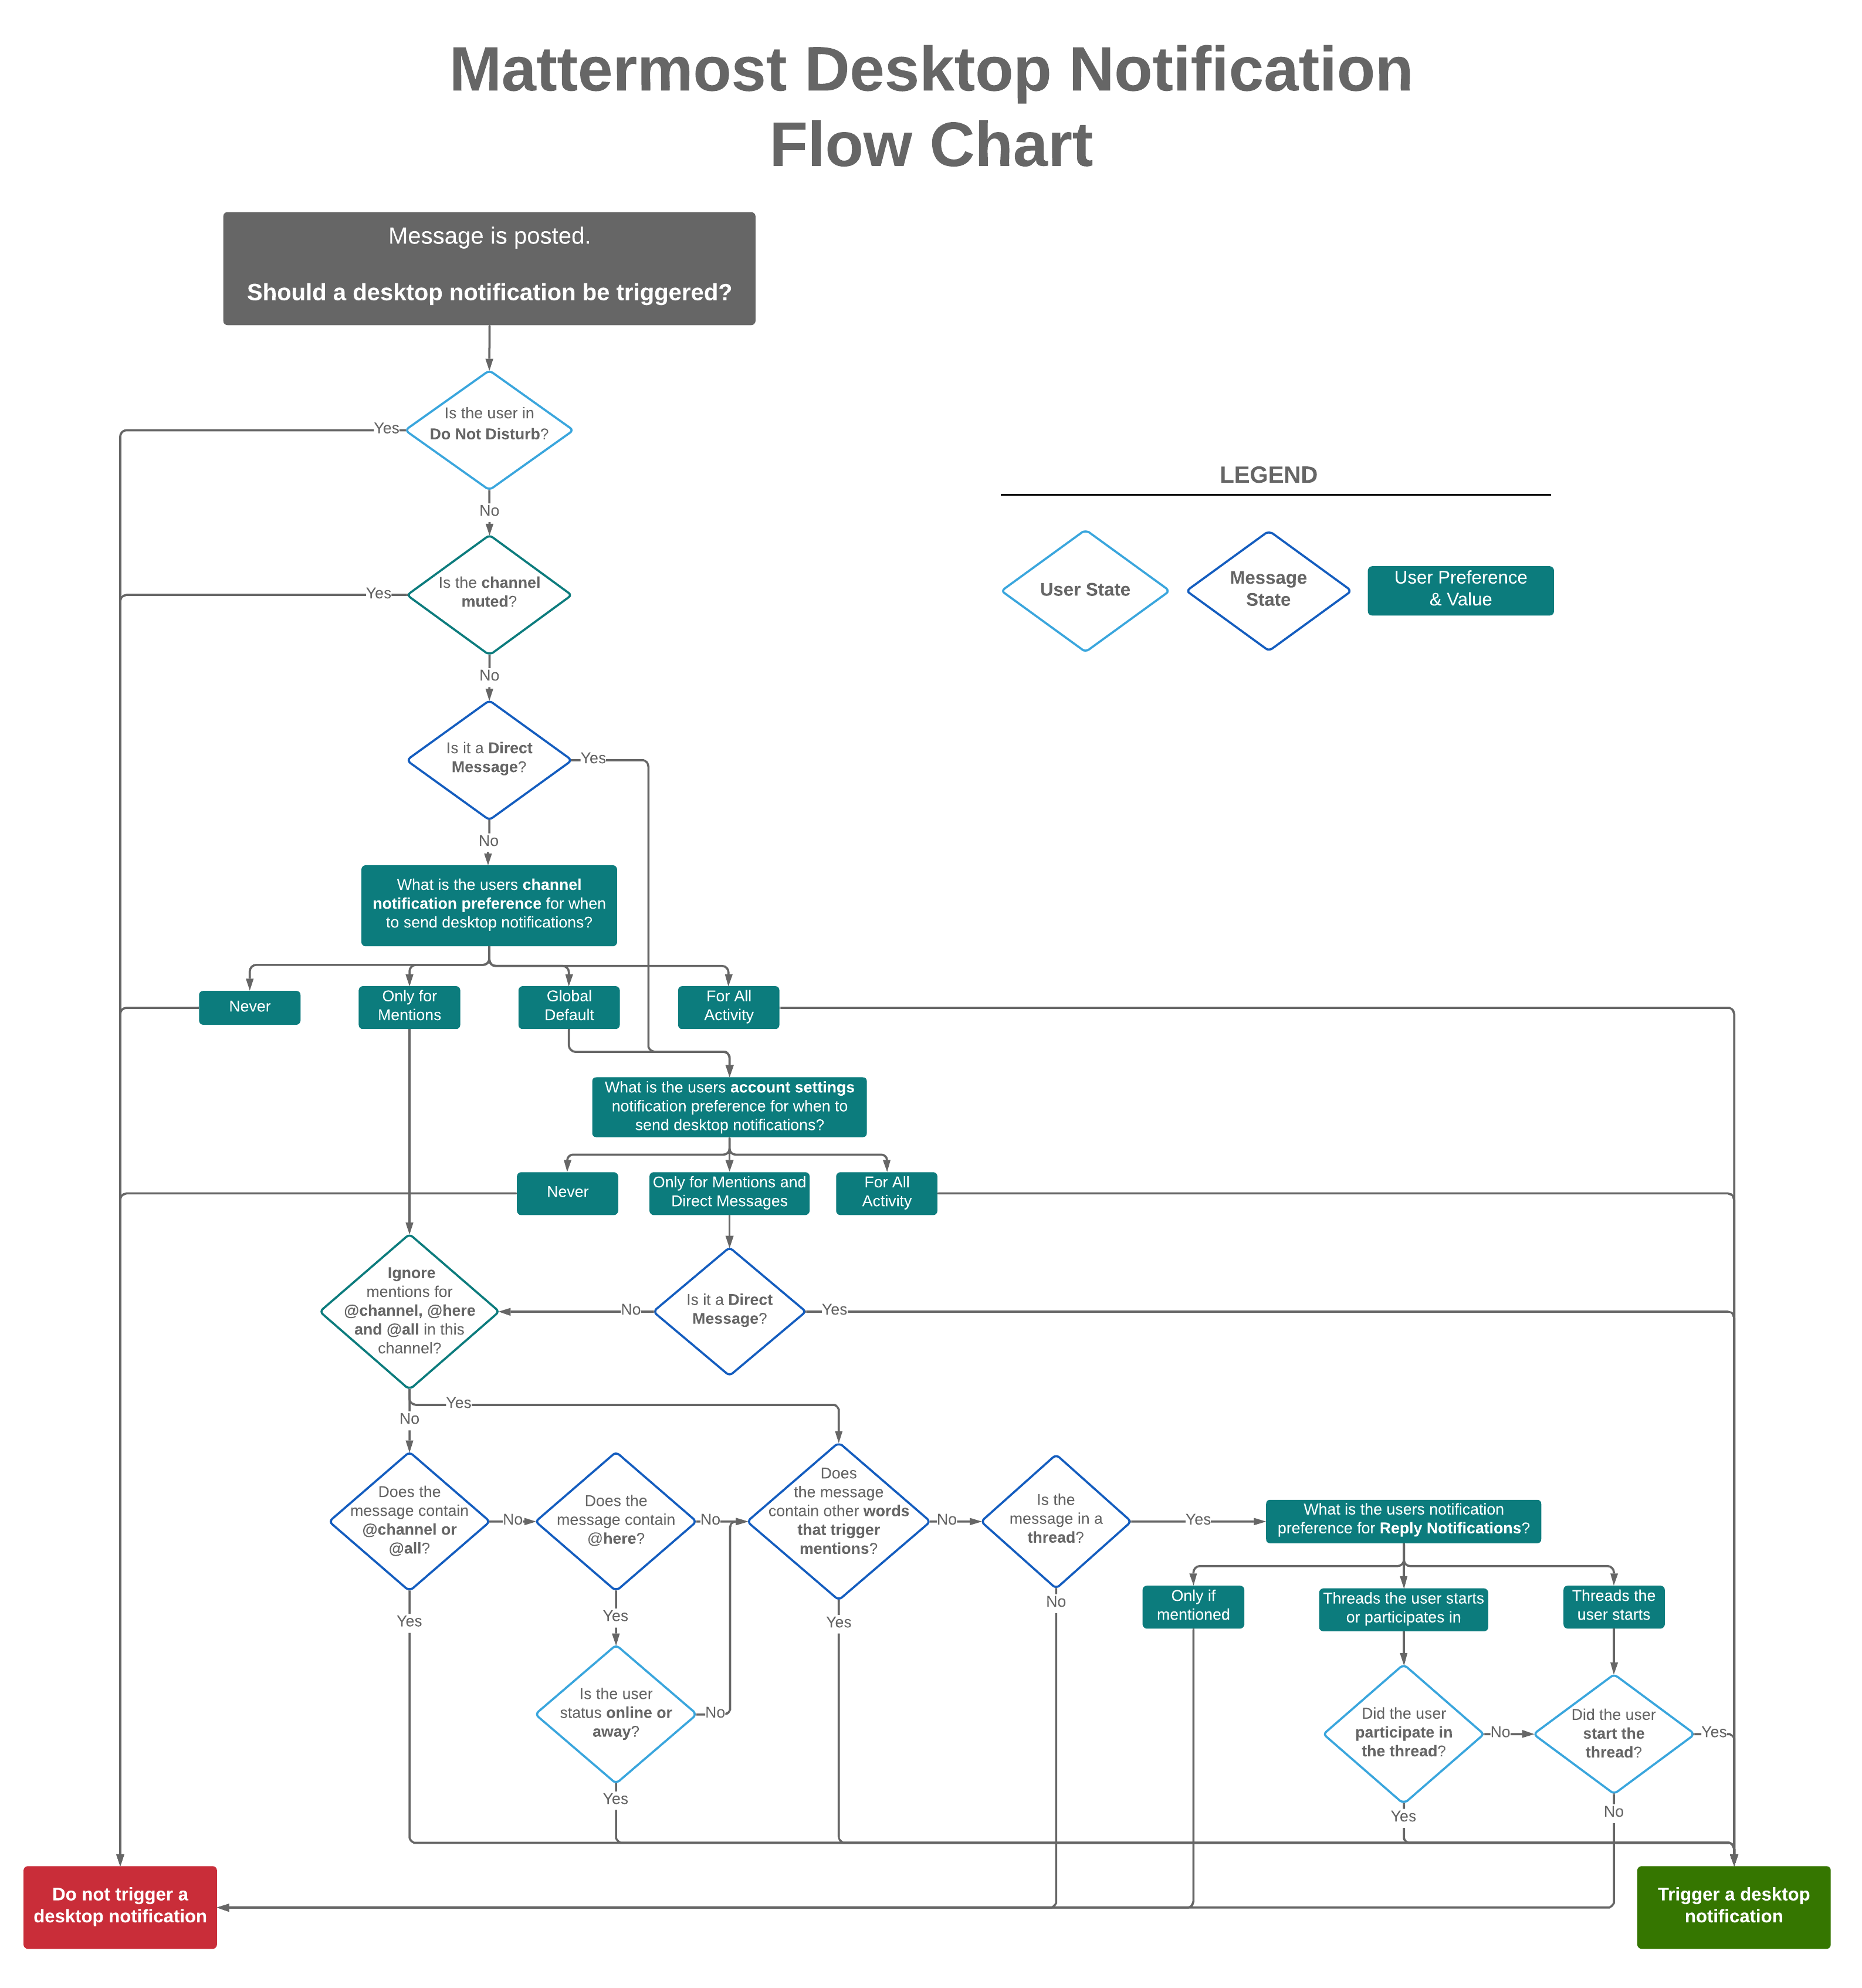 A flow diagram shows how Mattermost Desktop App notifications are triggered when a message is posted.